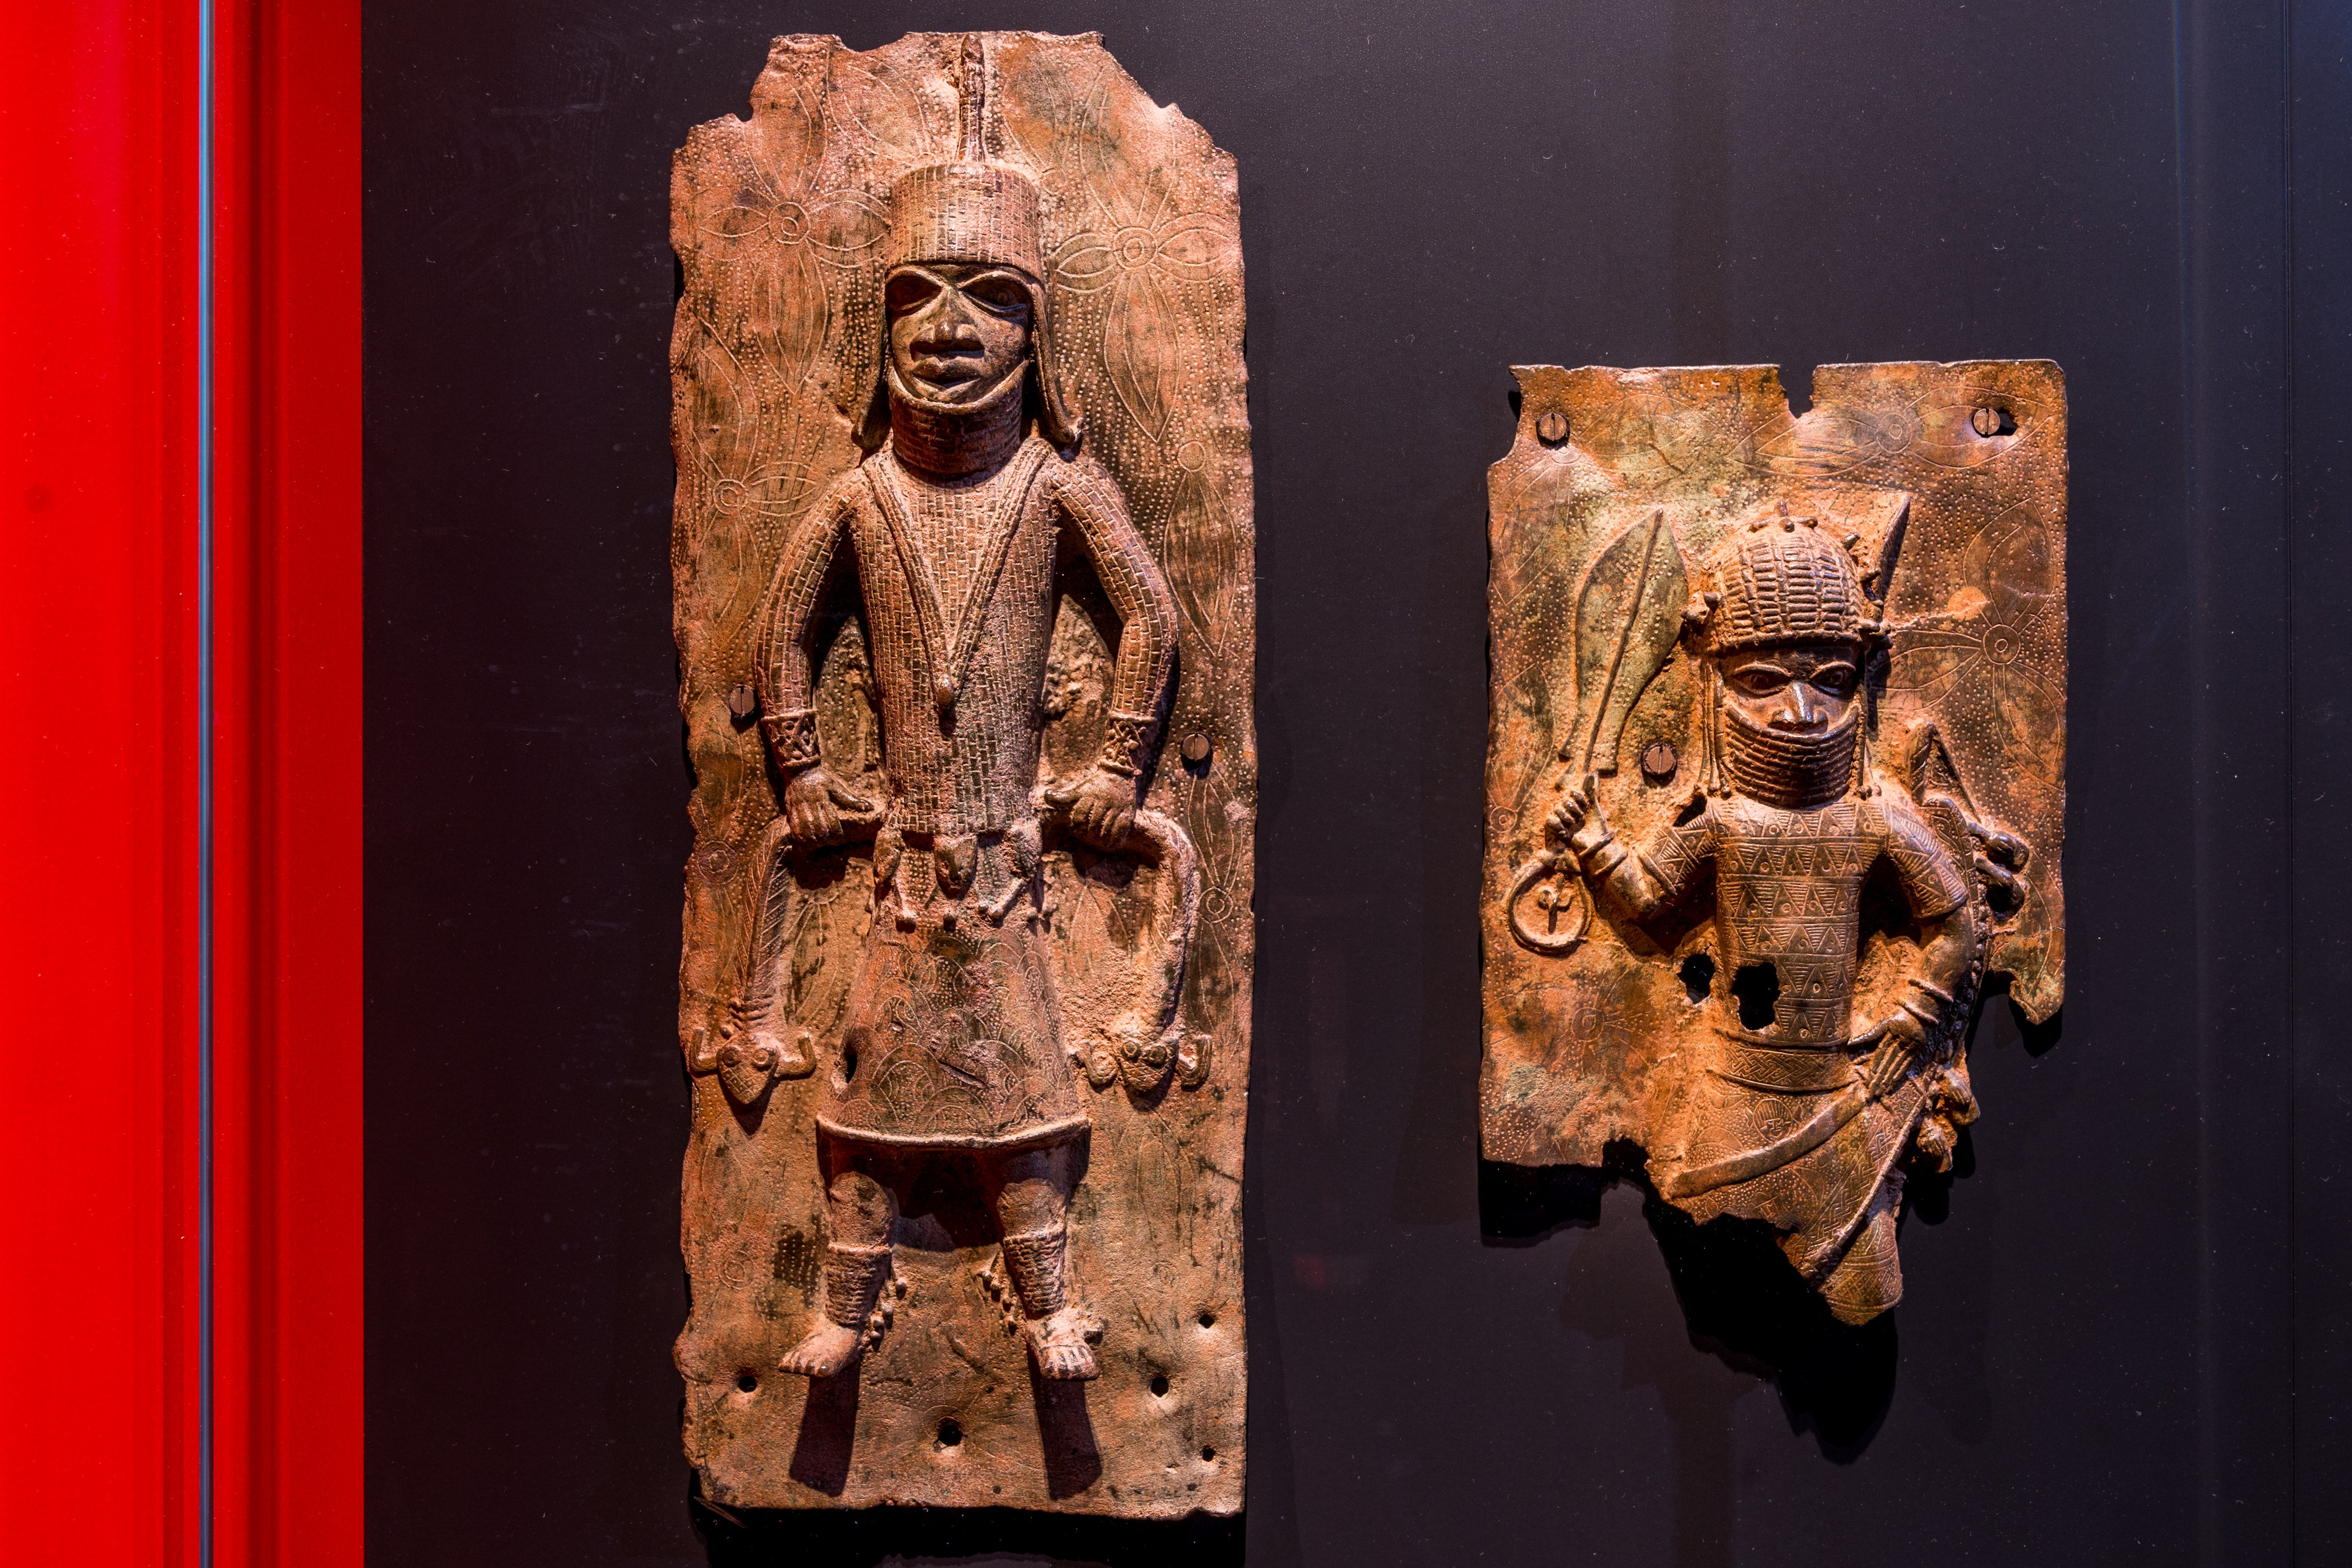 Sculptures looted by British soldiers from the Kingdom of Benin in 1897 hangs on display in the ‘Where Is Africa’ exhibition at the Linden Museum on May 05, 2021 in Stuttgart, Germany